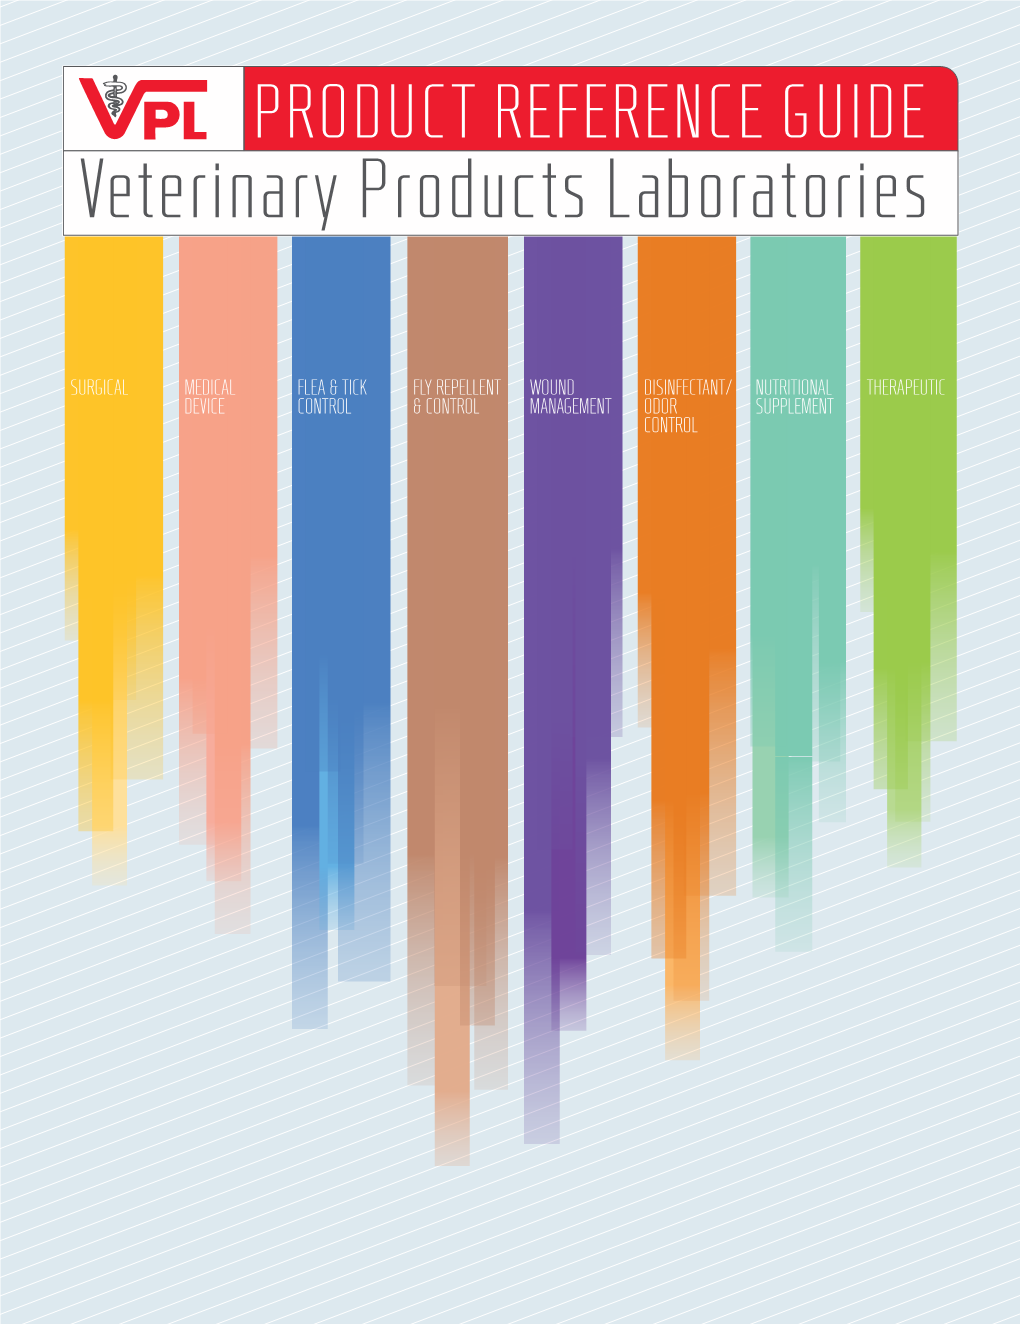 Veterinary Products Laboratories